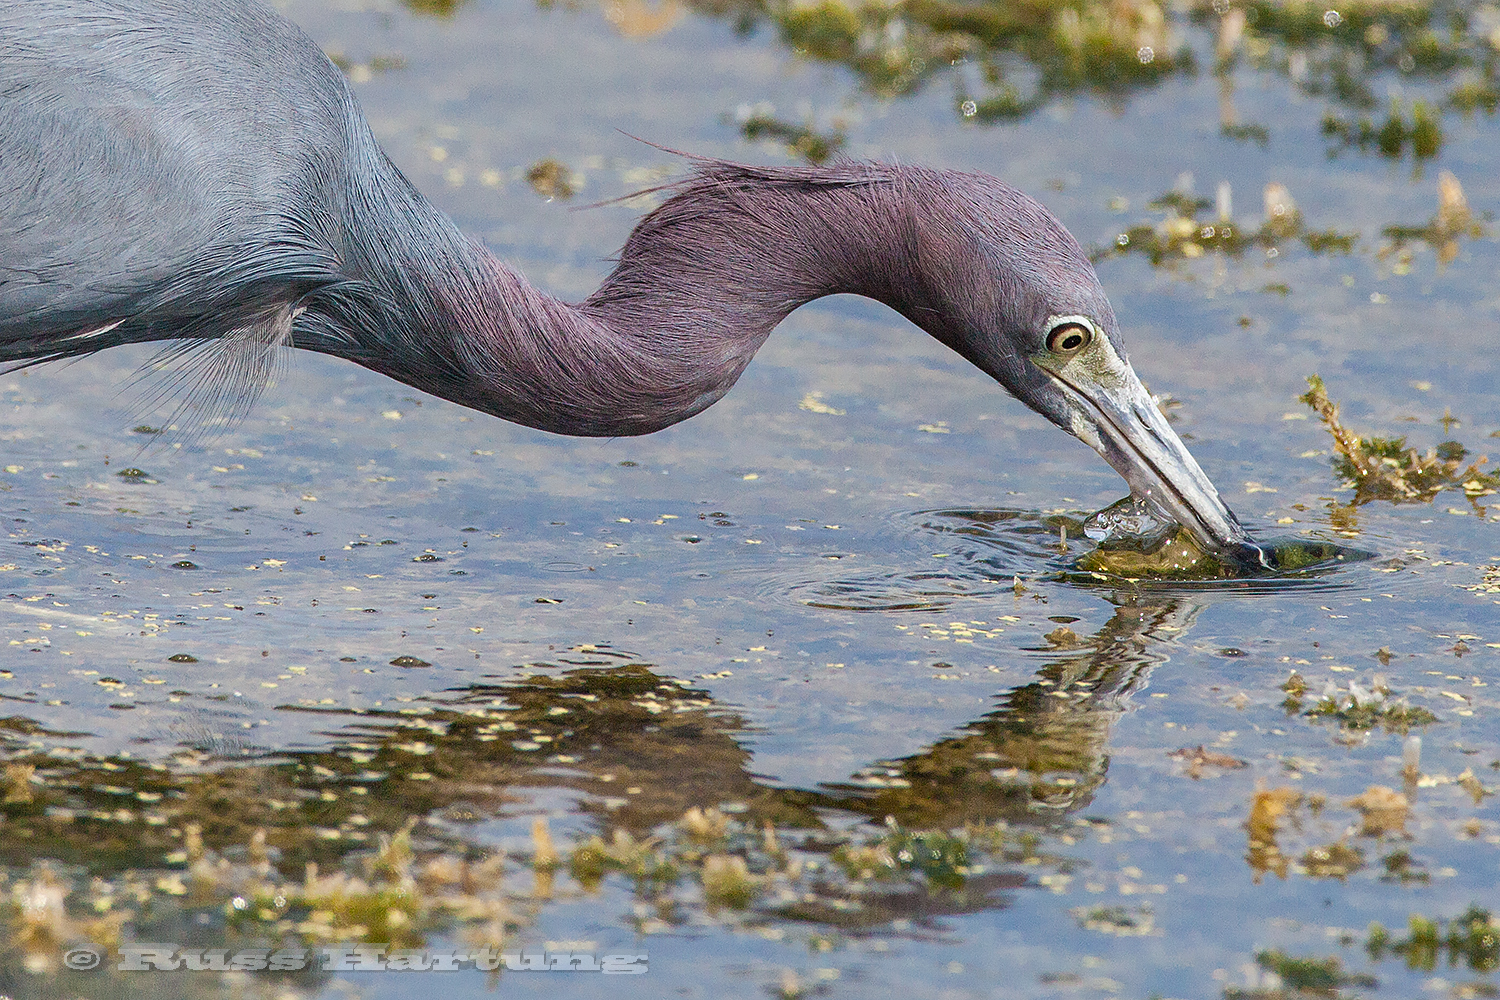 A Tricolored Heron strikes at a fish in the Orlando Wetlands Park. 